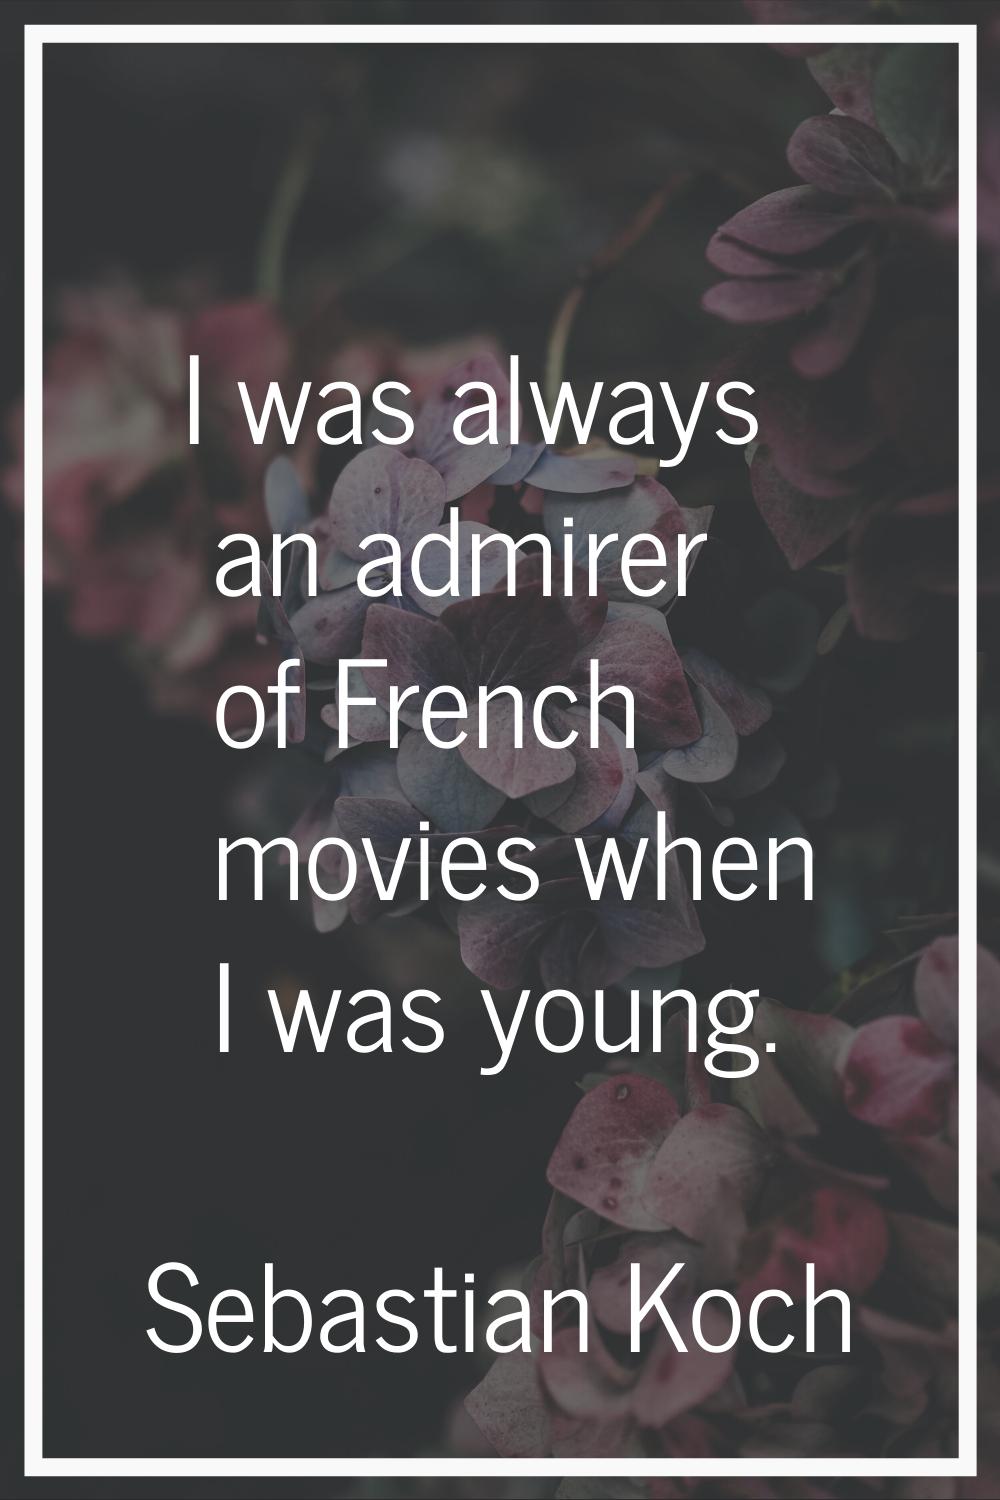 I was always an admirer of French movies when I was young.